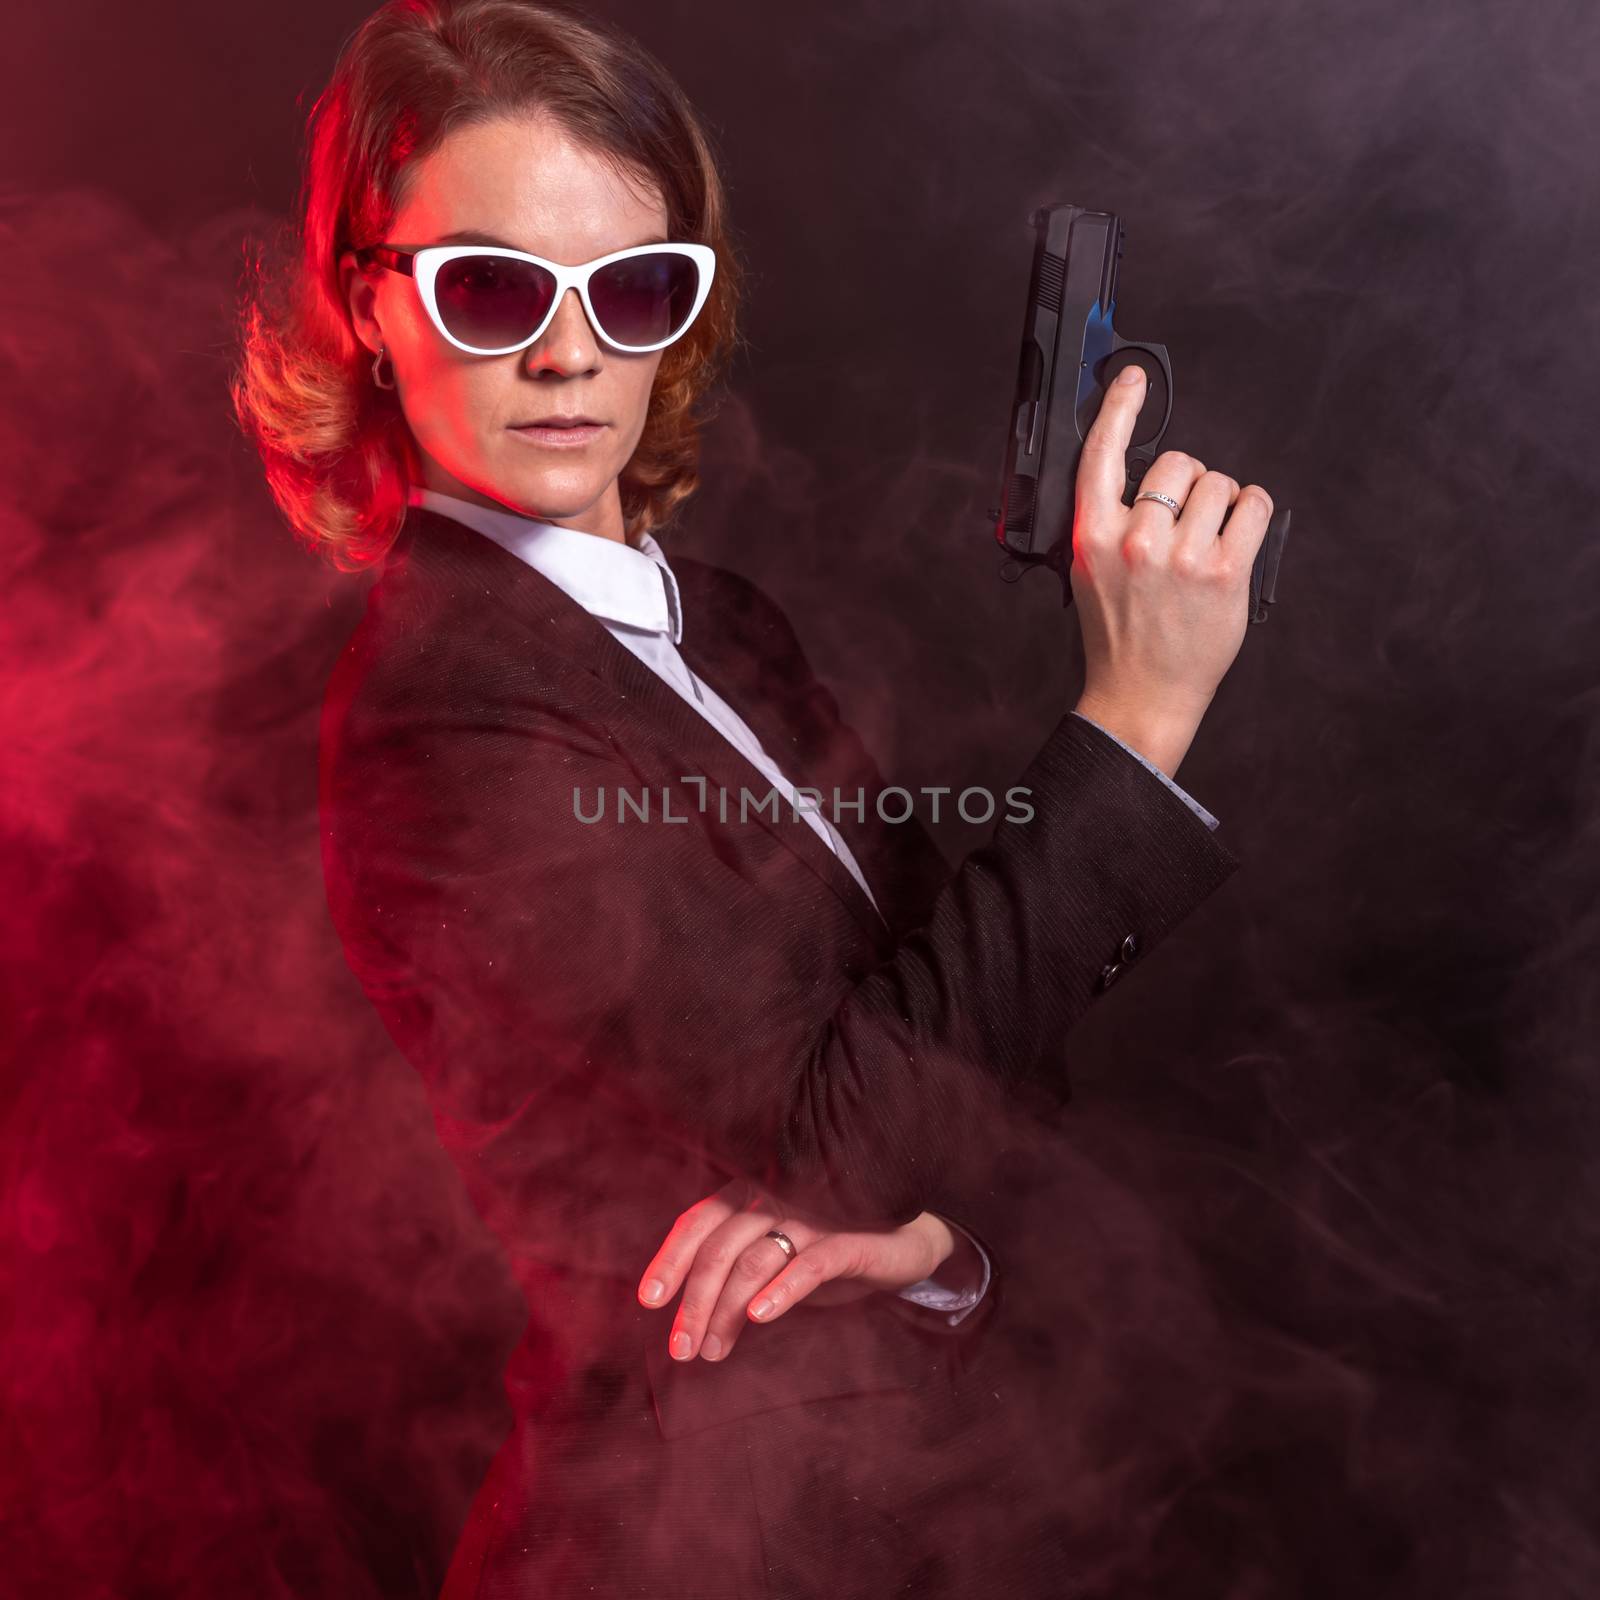 security services agent with a gun in his hand and sun glasses on the eyes by Edophoto